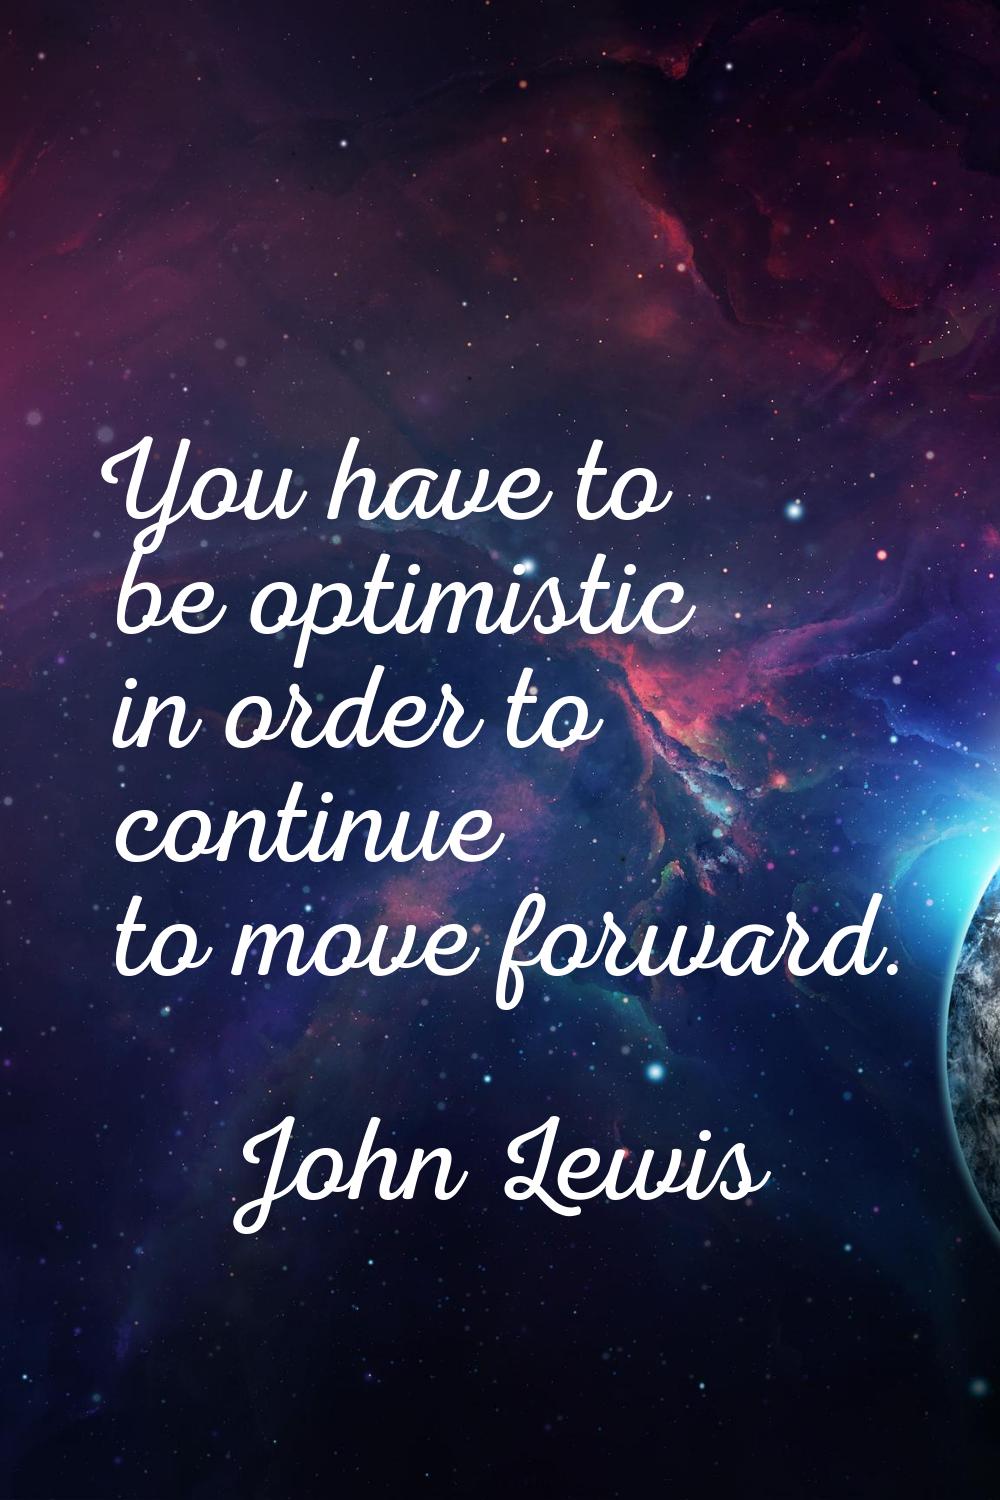 You have to be optimistic in order to continue to move forward.